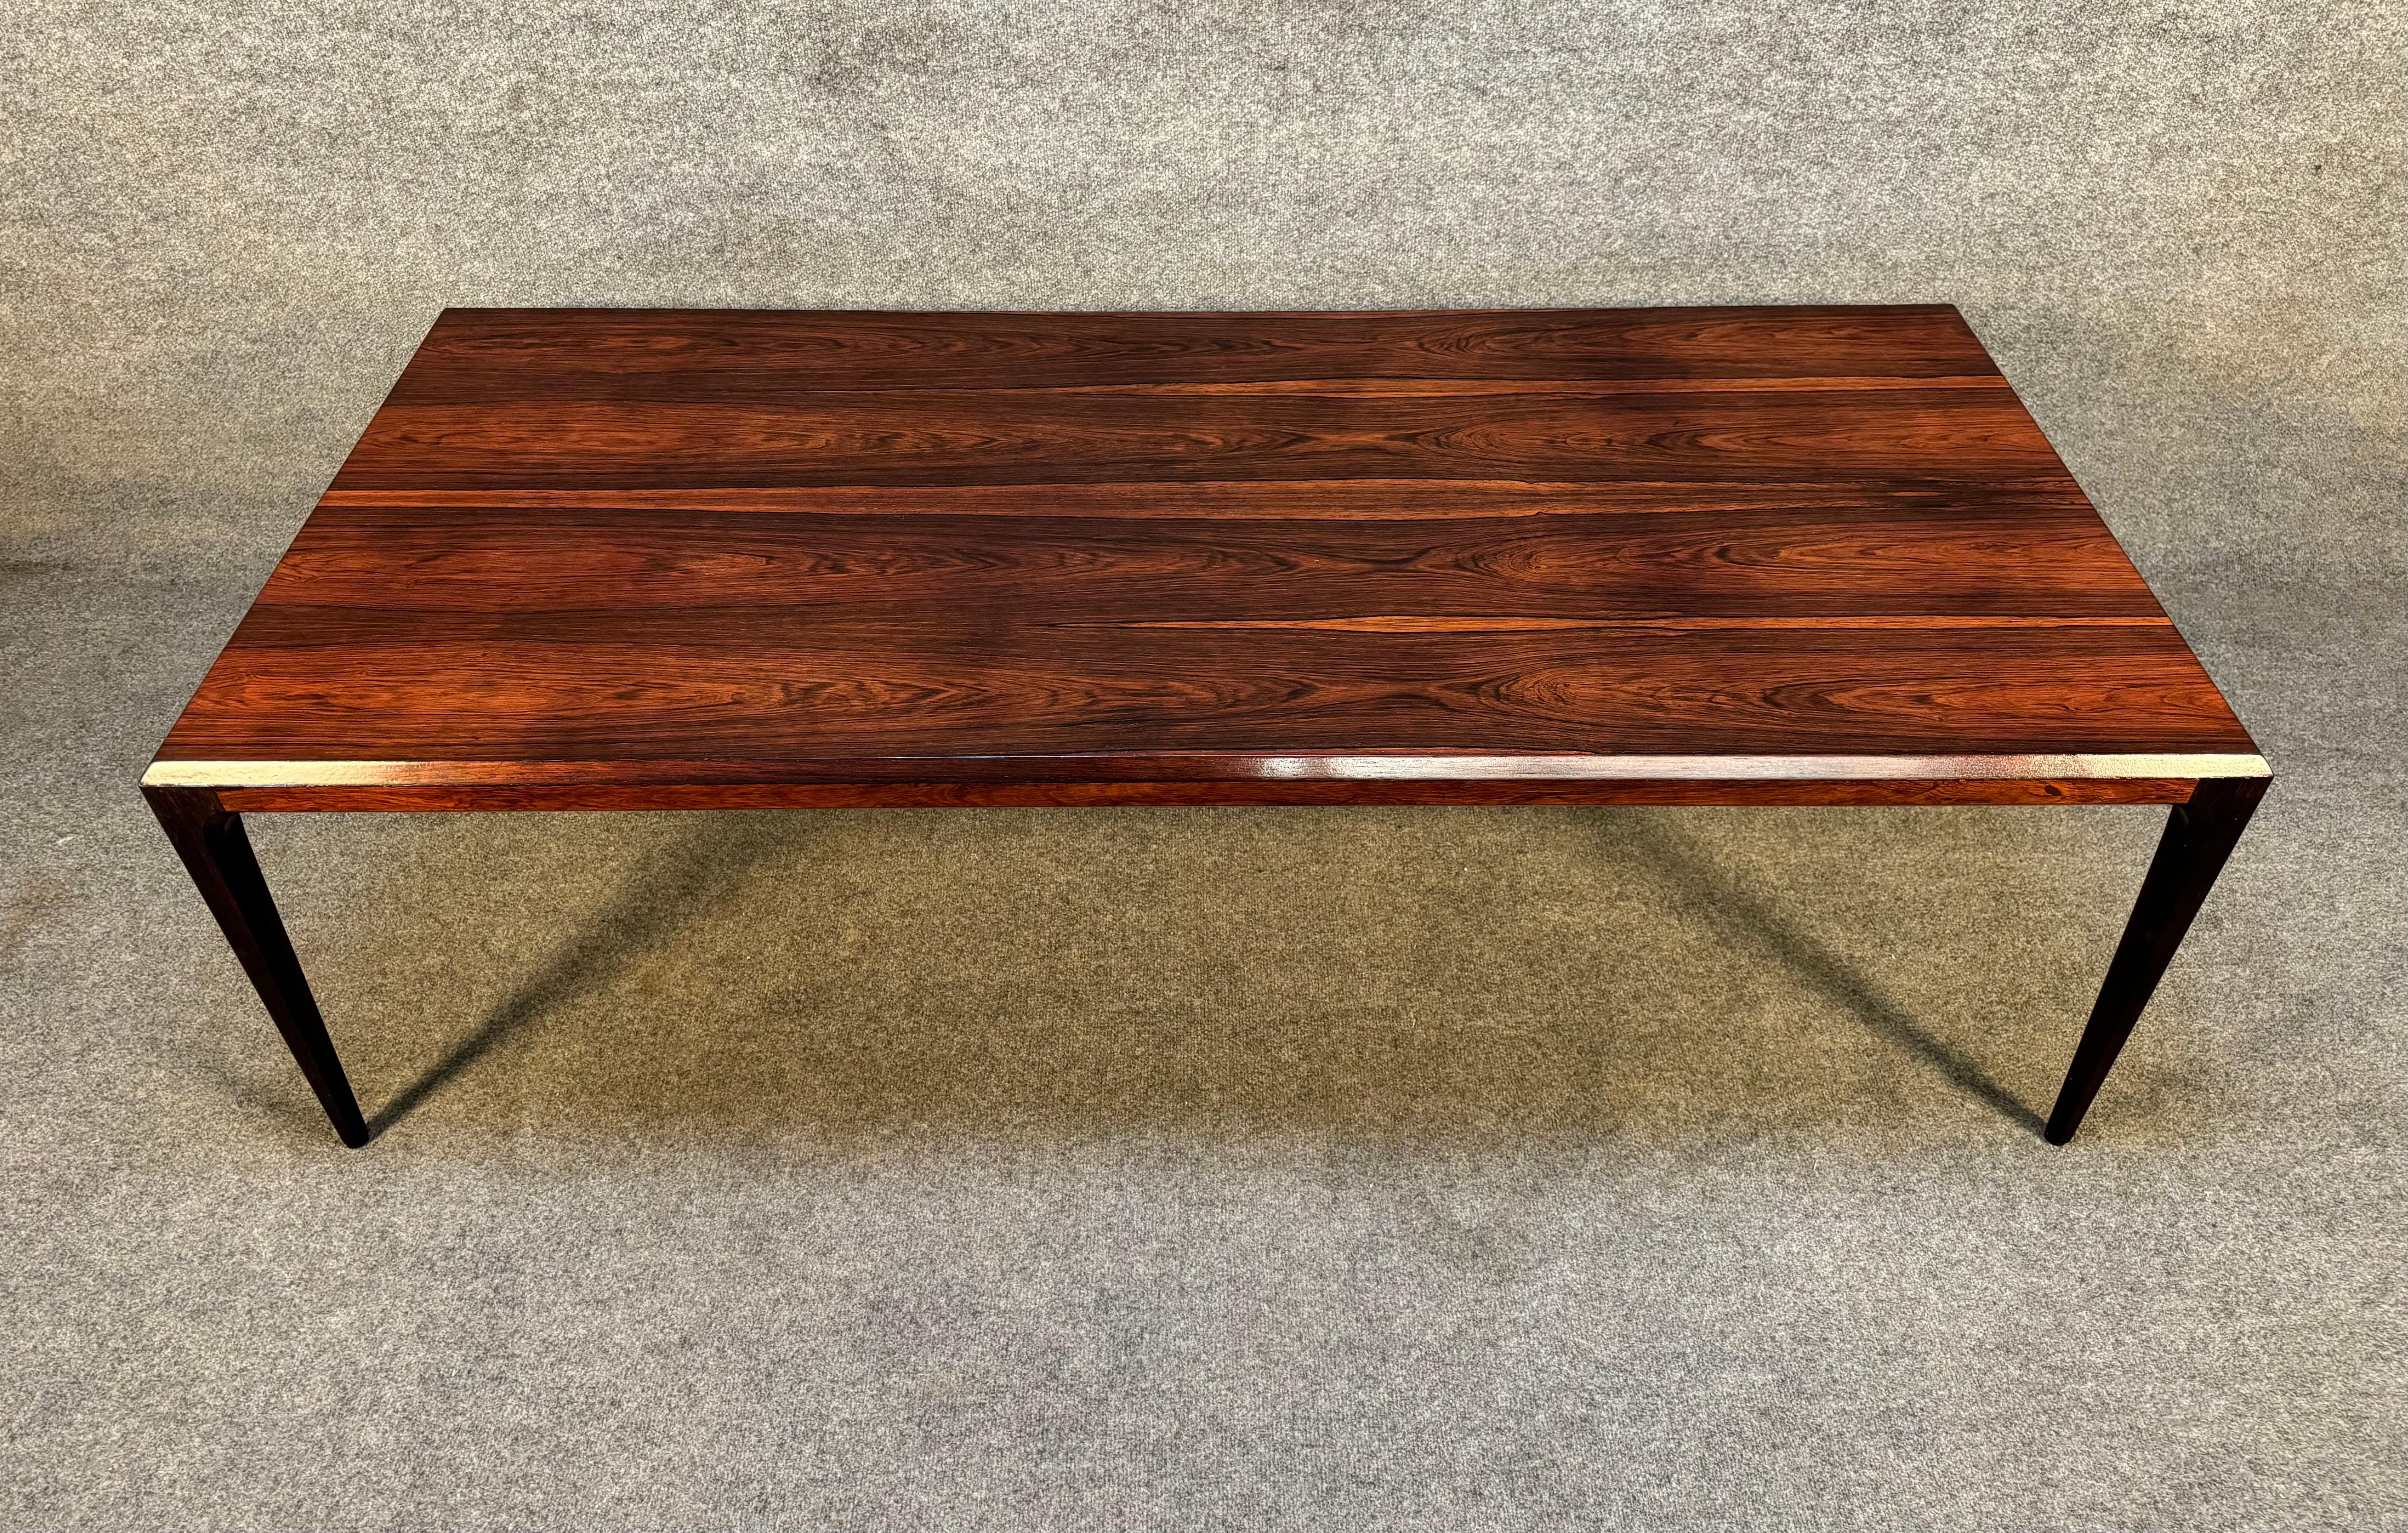 Here is a beautiful Scandinavian modern cocktail table in rosewood designed by Johannes Andersen and manufactured by CFC Mobelfabrik in Denmark in the 1960's.
This lovely table, recently imported from Europe to California before its refinshing,